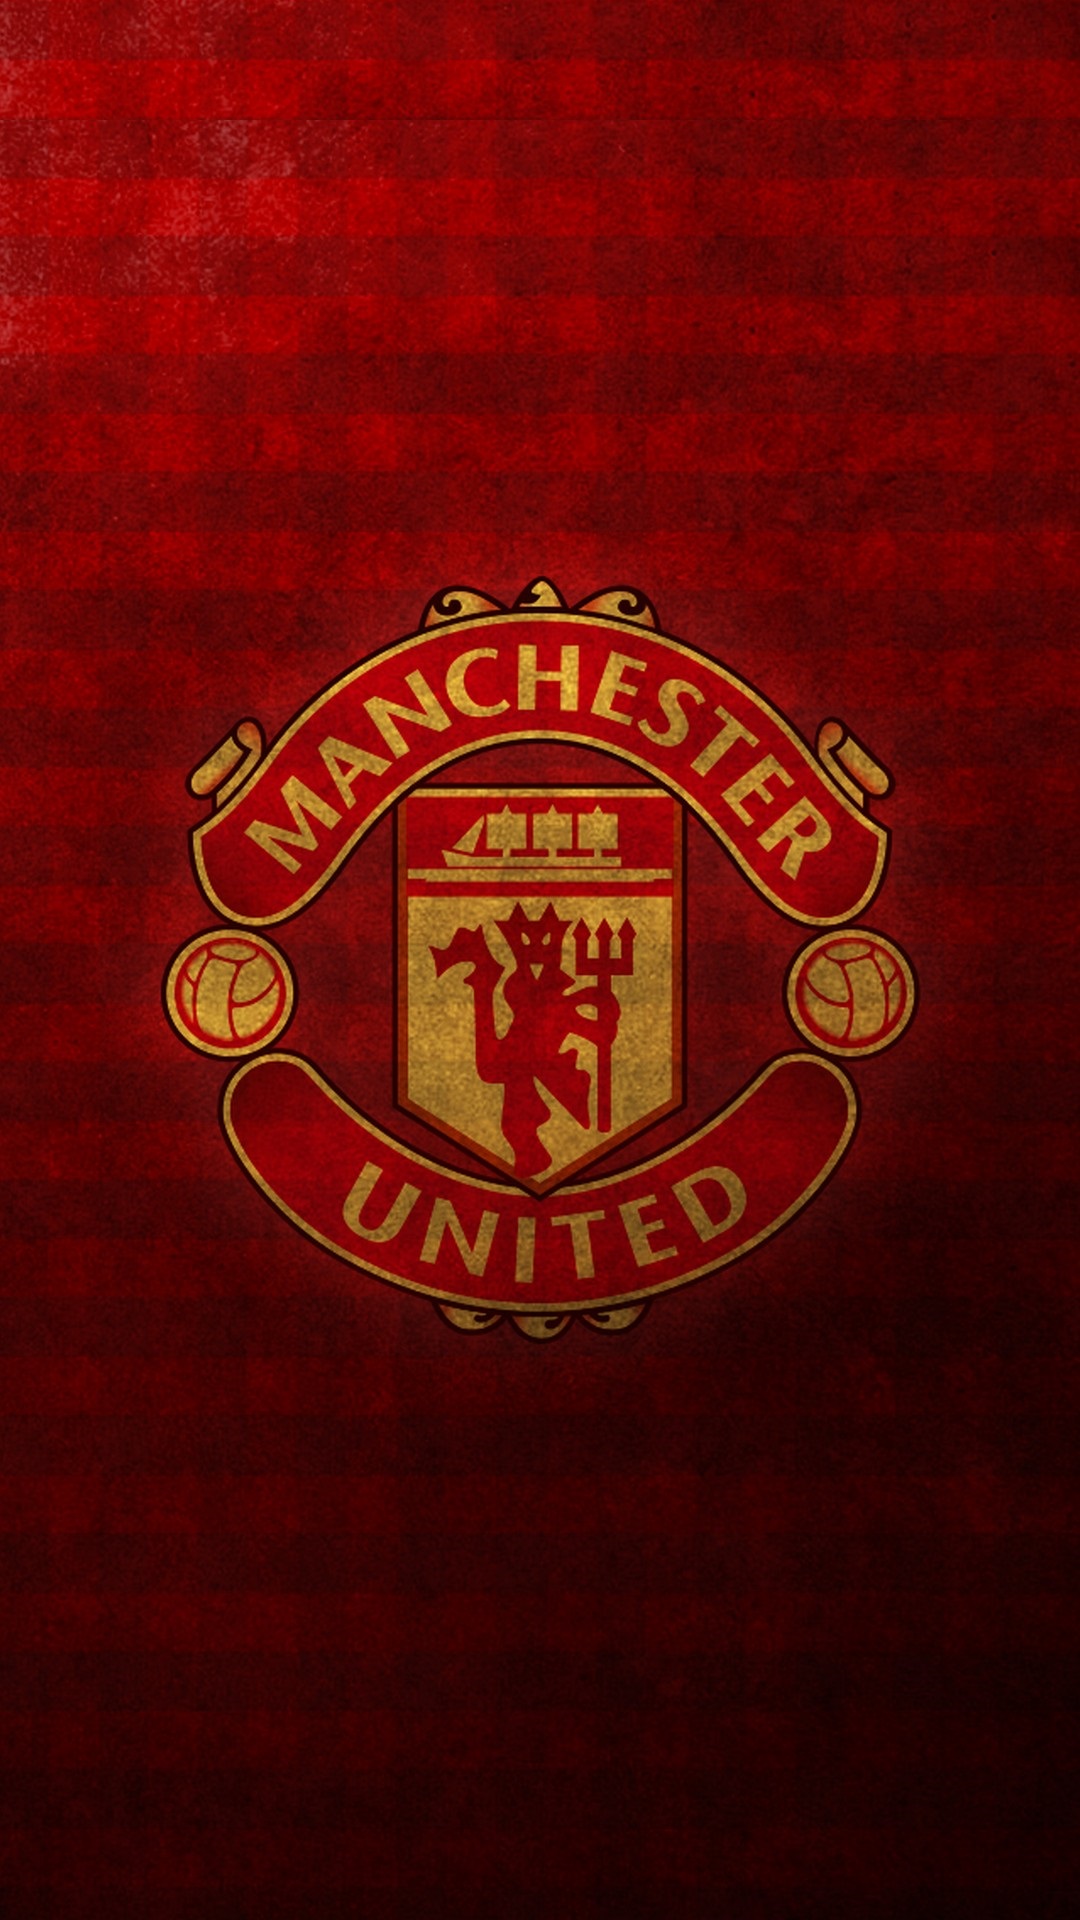 Manchester United Wallpaper Mobile with high-resolution 1080x1920 pixel. You can use this wallpaper for your Desktop Computers, Mac Screensavers, Windows Backgrounds, iPhone Wallpapers, Tablet or Android Lock screen and another Mobile device